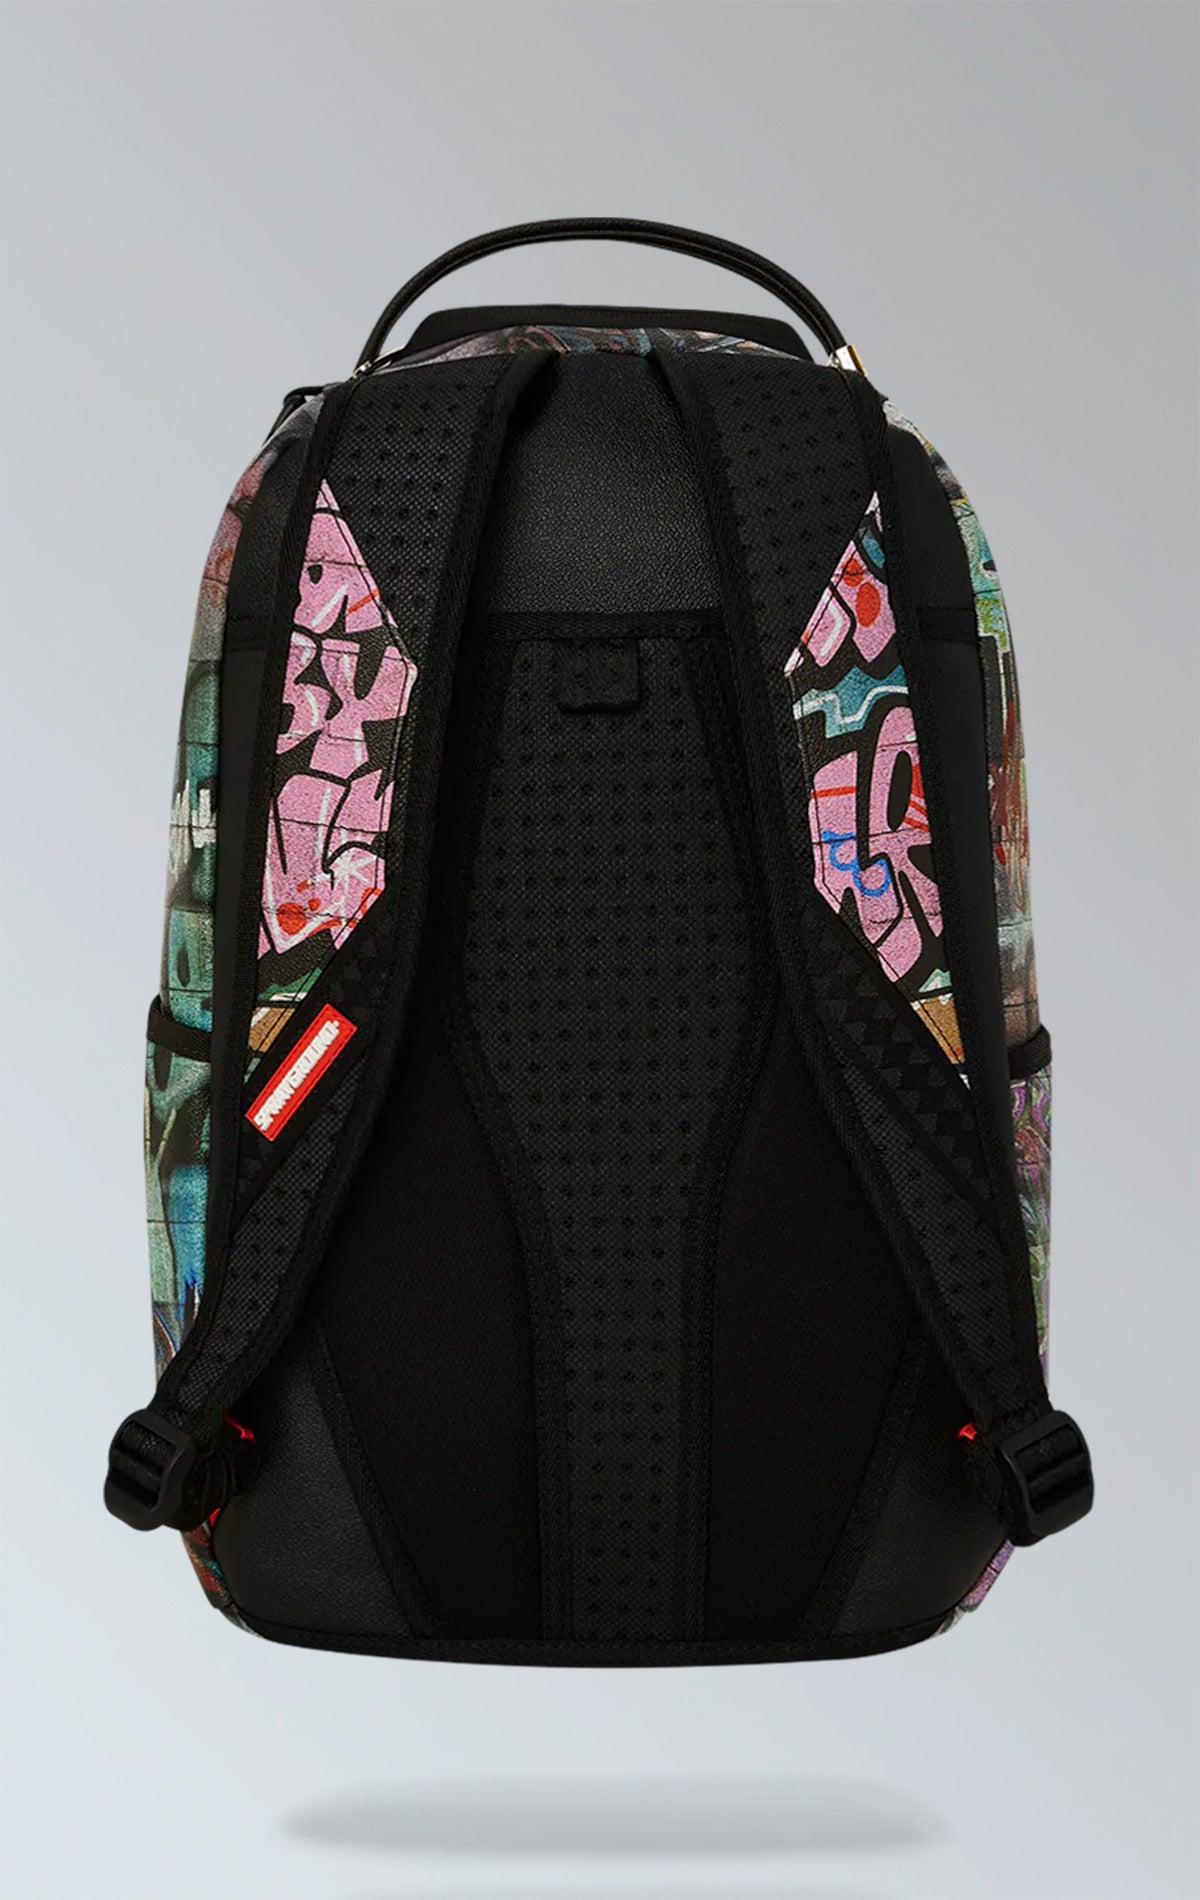 Sprayground limited-edition backpack celebration of 30 years of hip-hop group Naughty by Nature. It features a bold and vibrant design with the iconic Naughty by Nature logo and graphics from their album "Hip Hop Hooray."